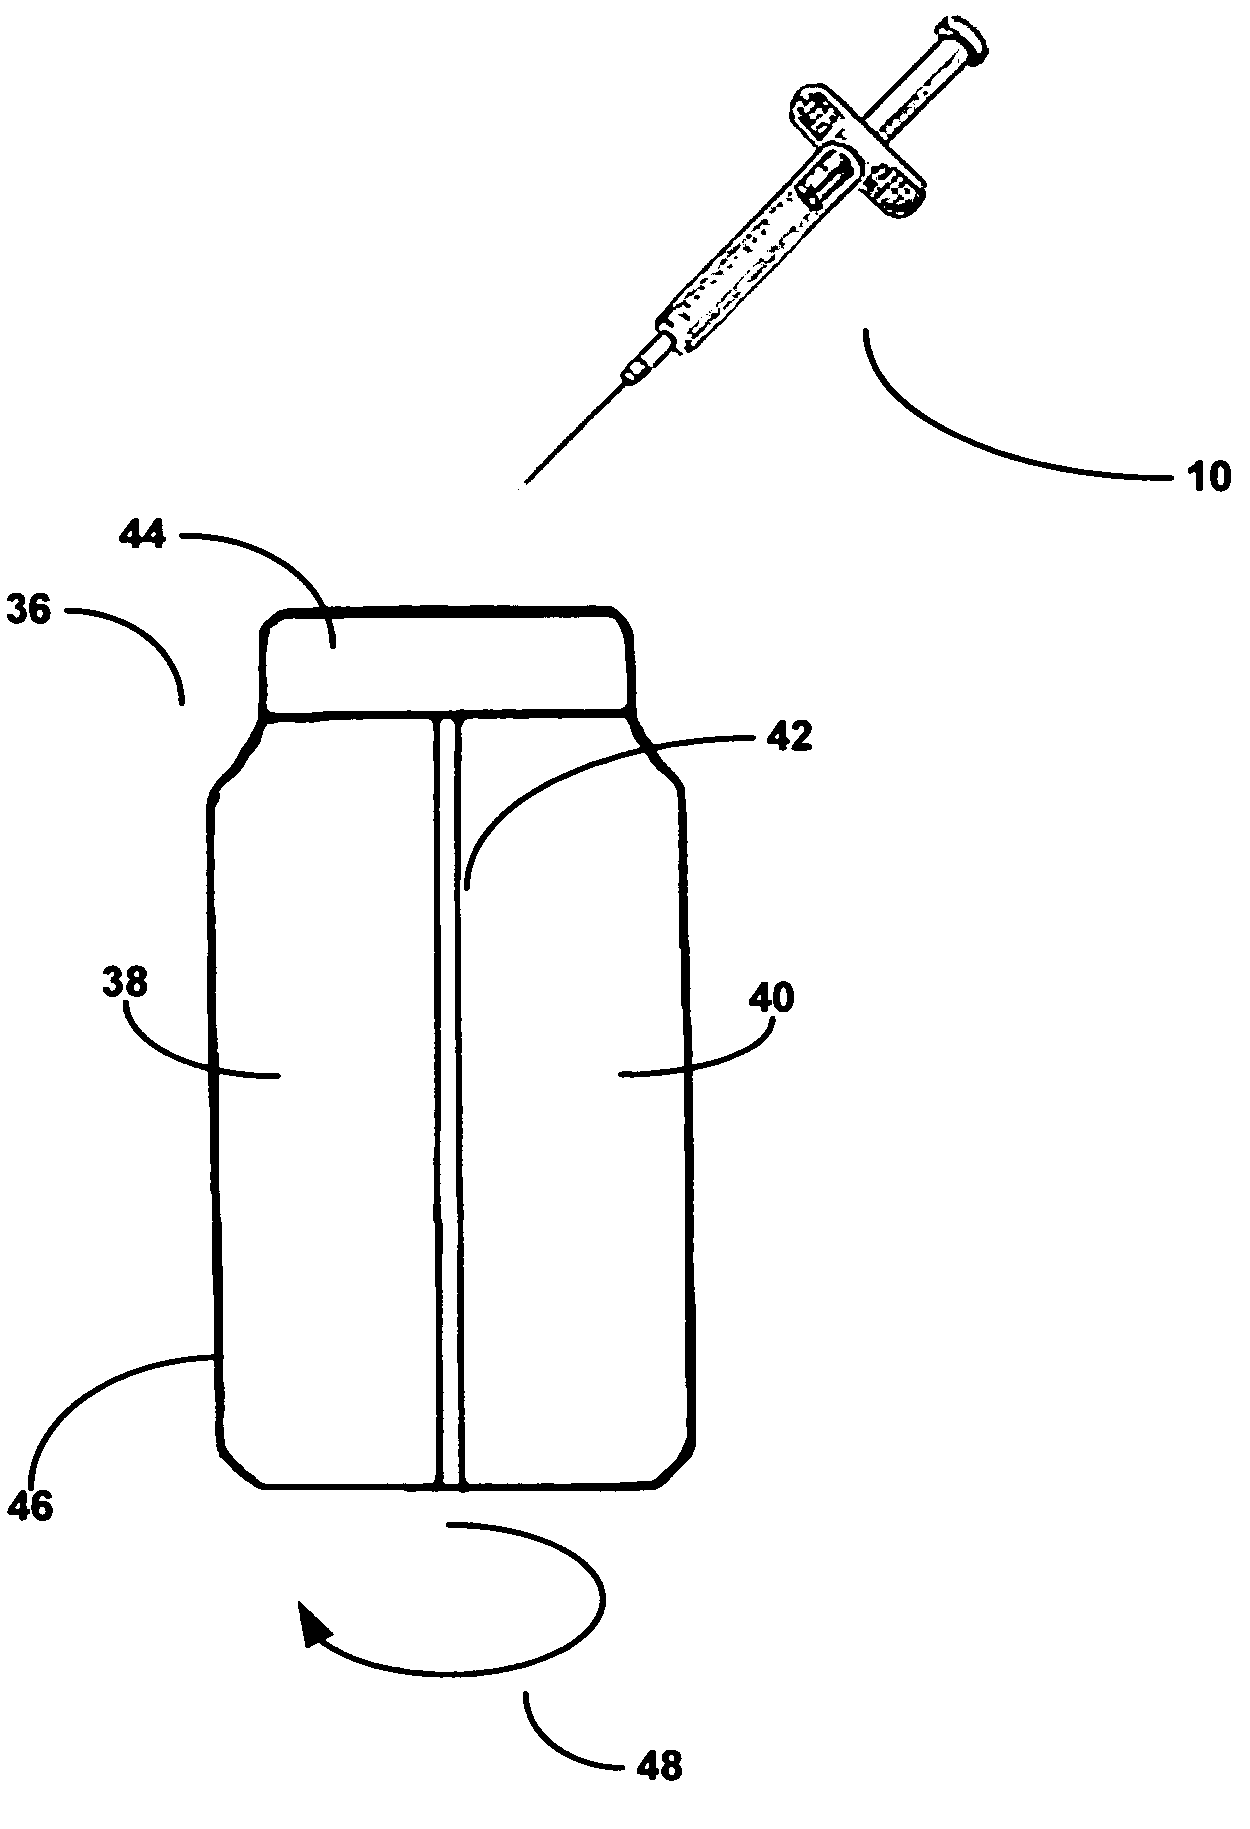 Method and apparatus for providing therapeutically effective dosage formulations of lidocaine with and without epinephrine